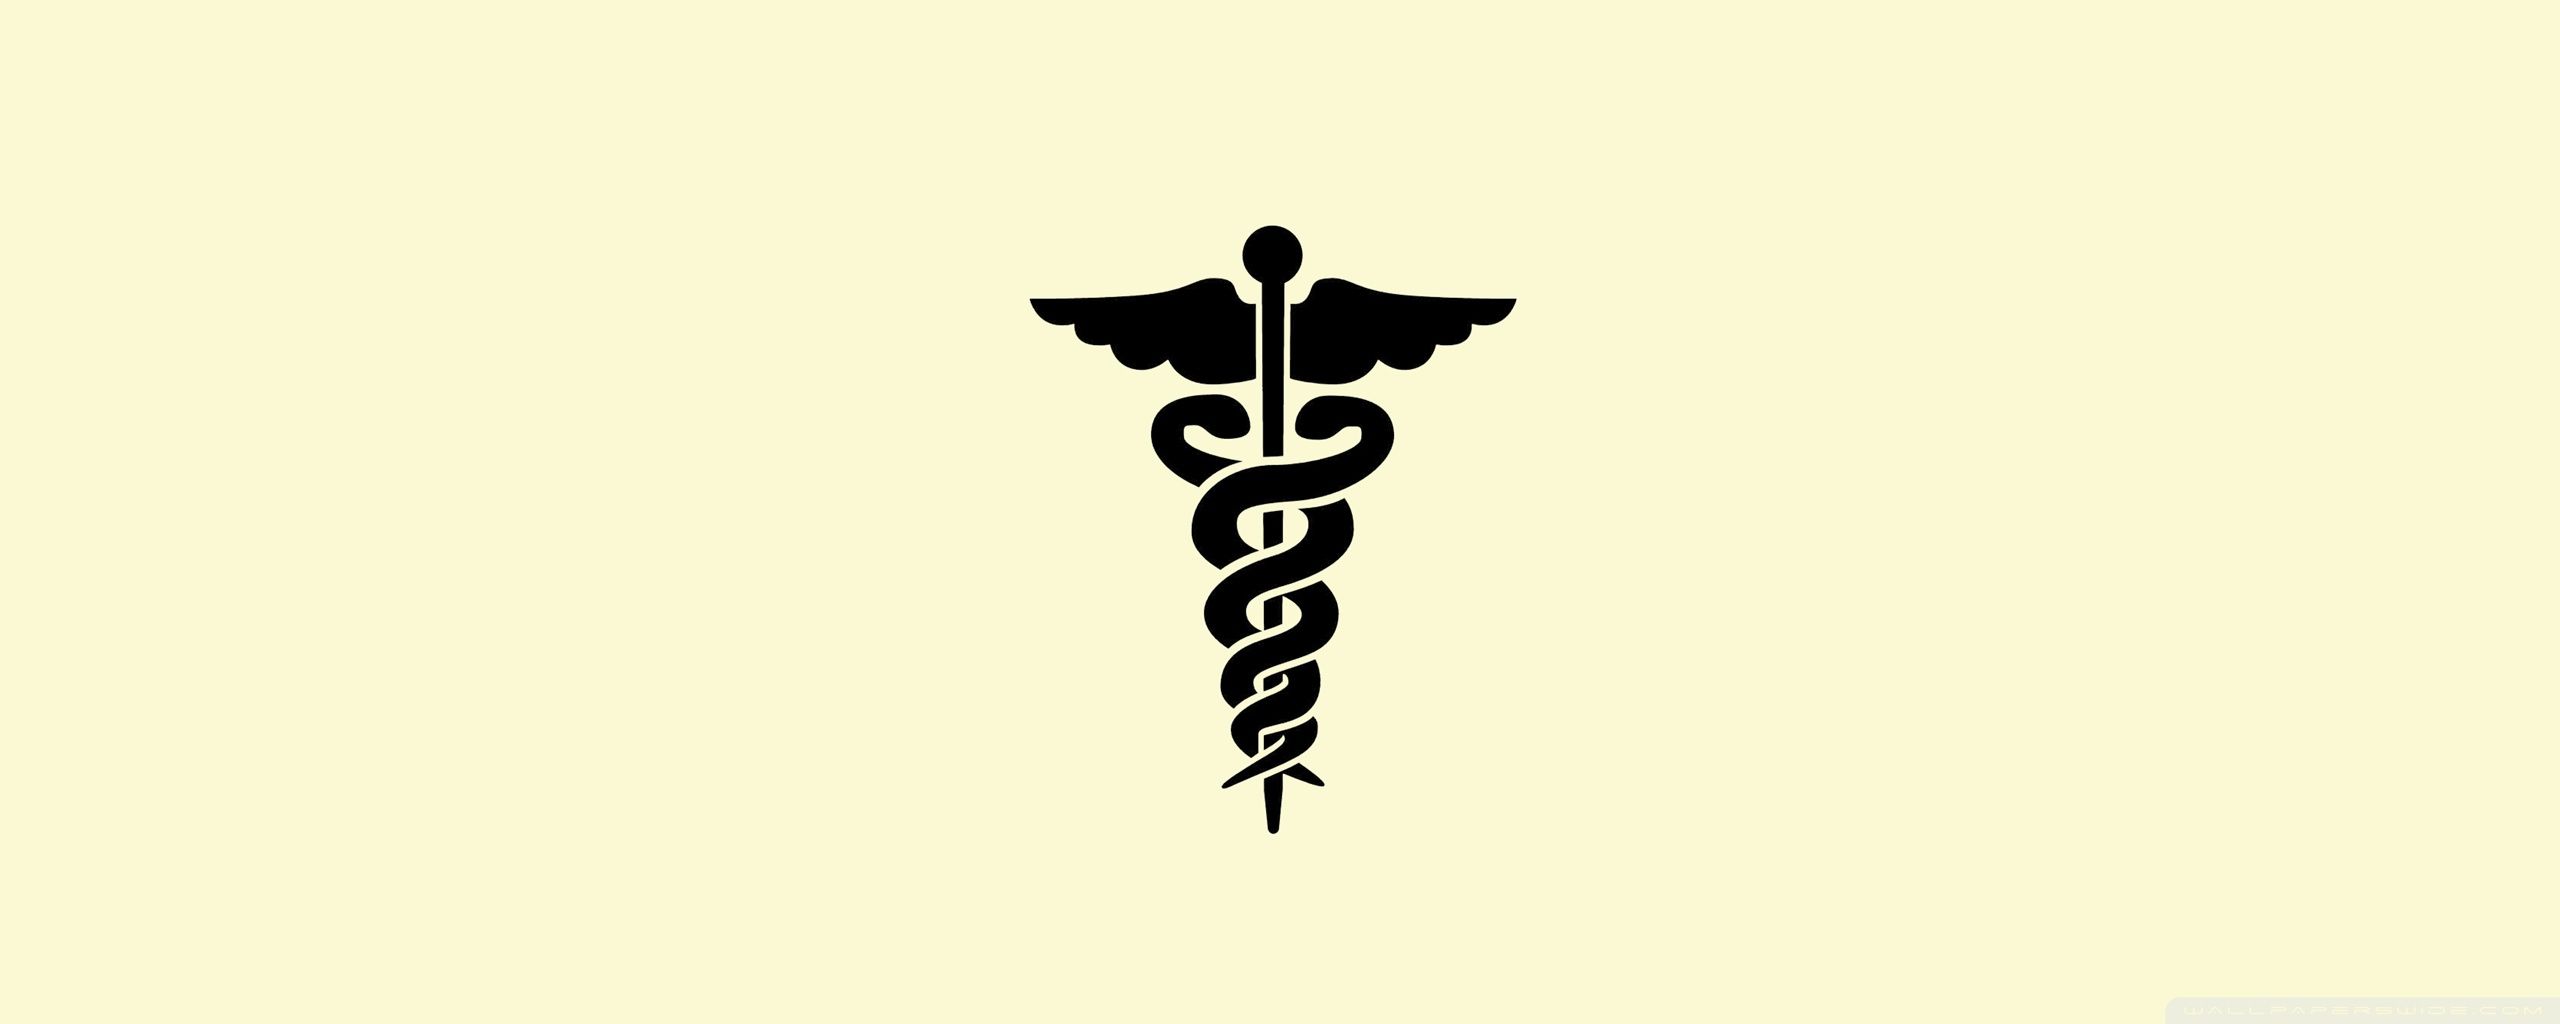 A black caduceus medical symbol on a pale yellow background - 